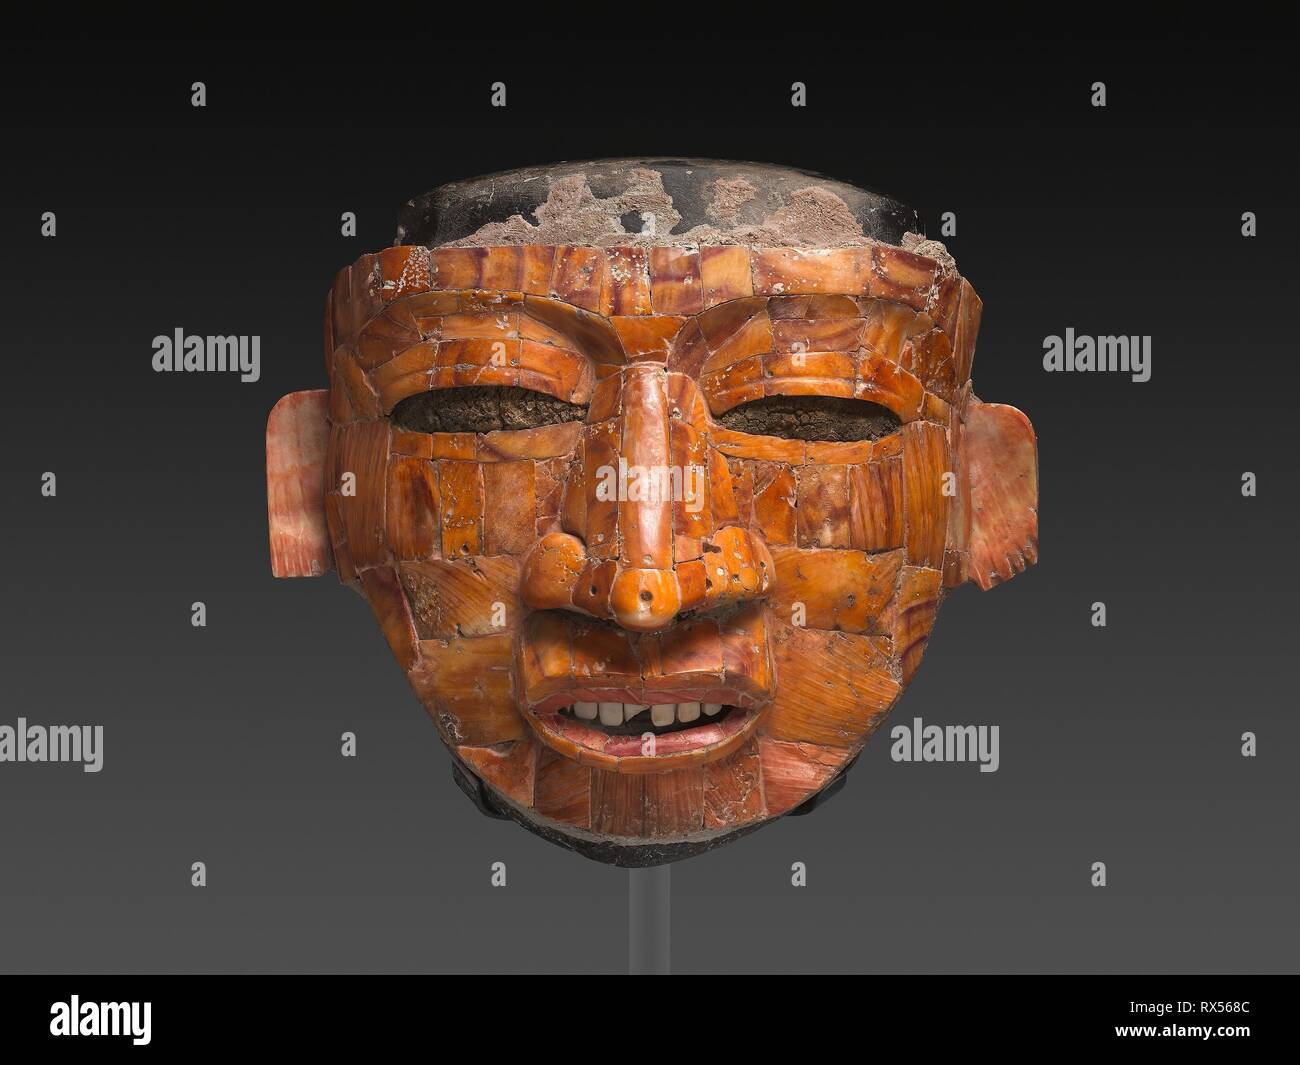 Shell Mosaic Ritual Mask Teotihuacan Teotihuacan Mexico Date 300 Ad 600 Ad Dimensions 18 21 11 Cm 7 1 8 8 1 4 4 5 16 In Stone And Spondylus Shell With Stucco Origin Teotihuacan Museum The Chicago Art Institute Stock Photo Alamy